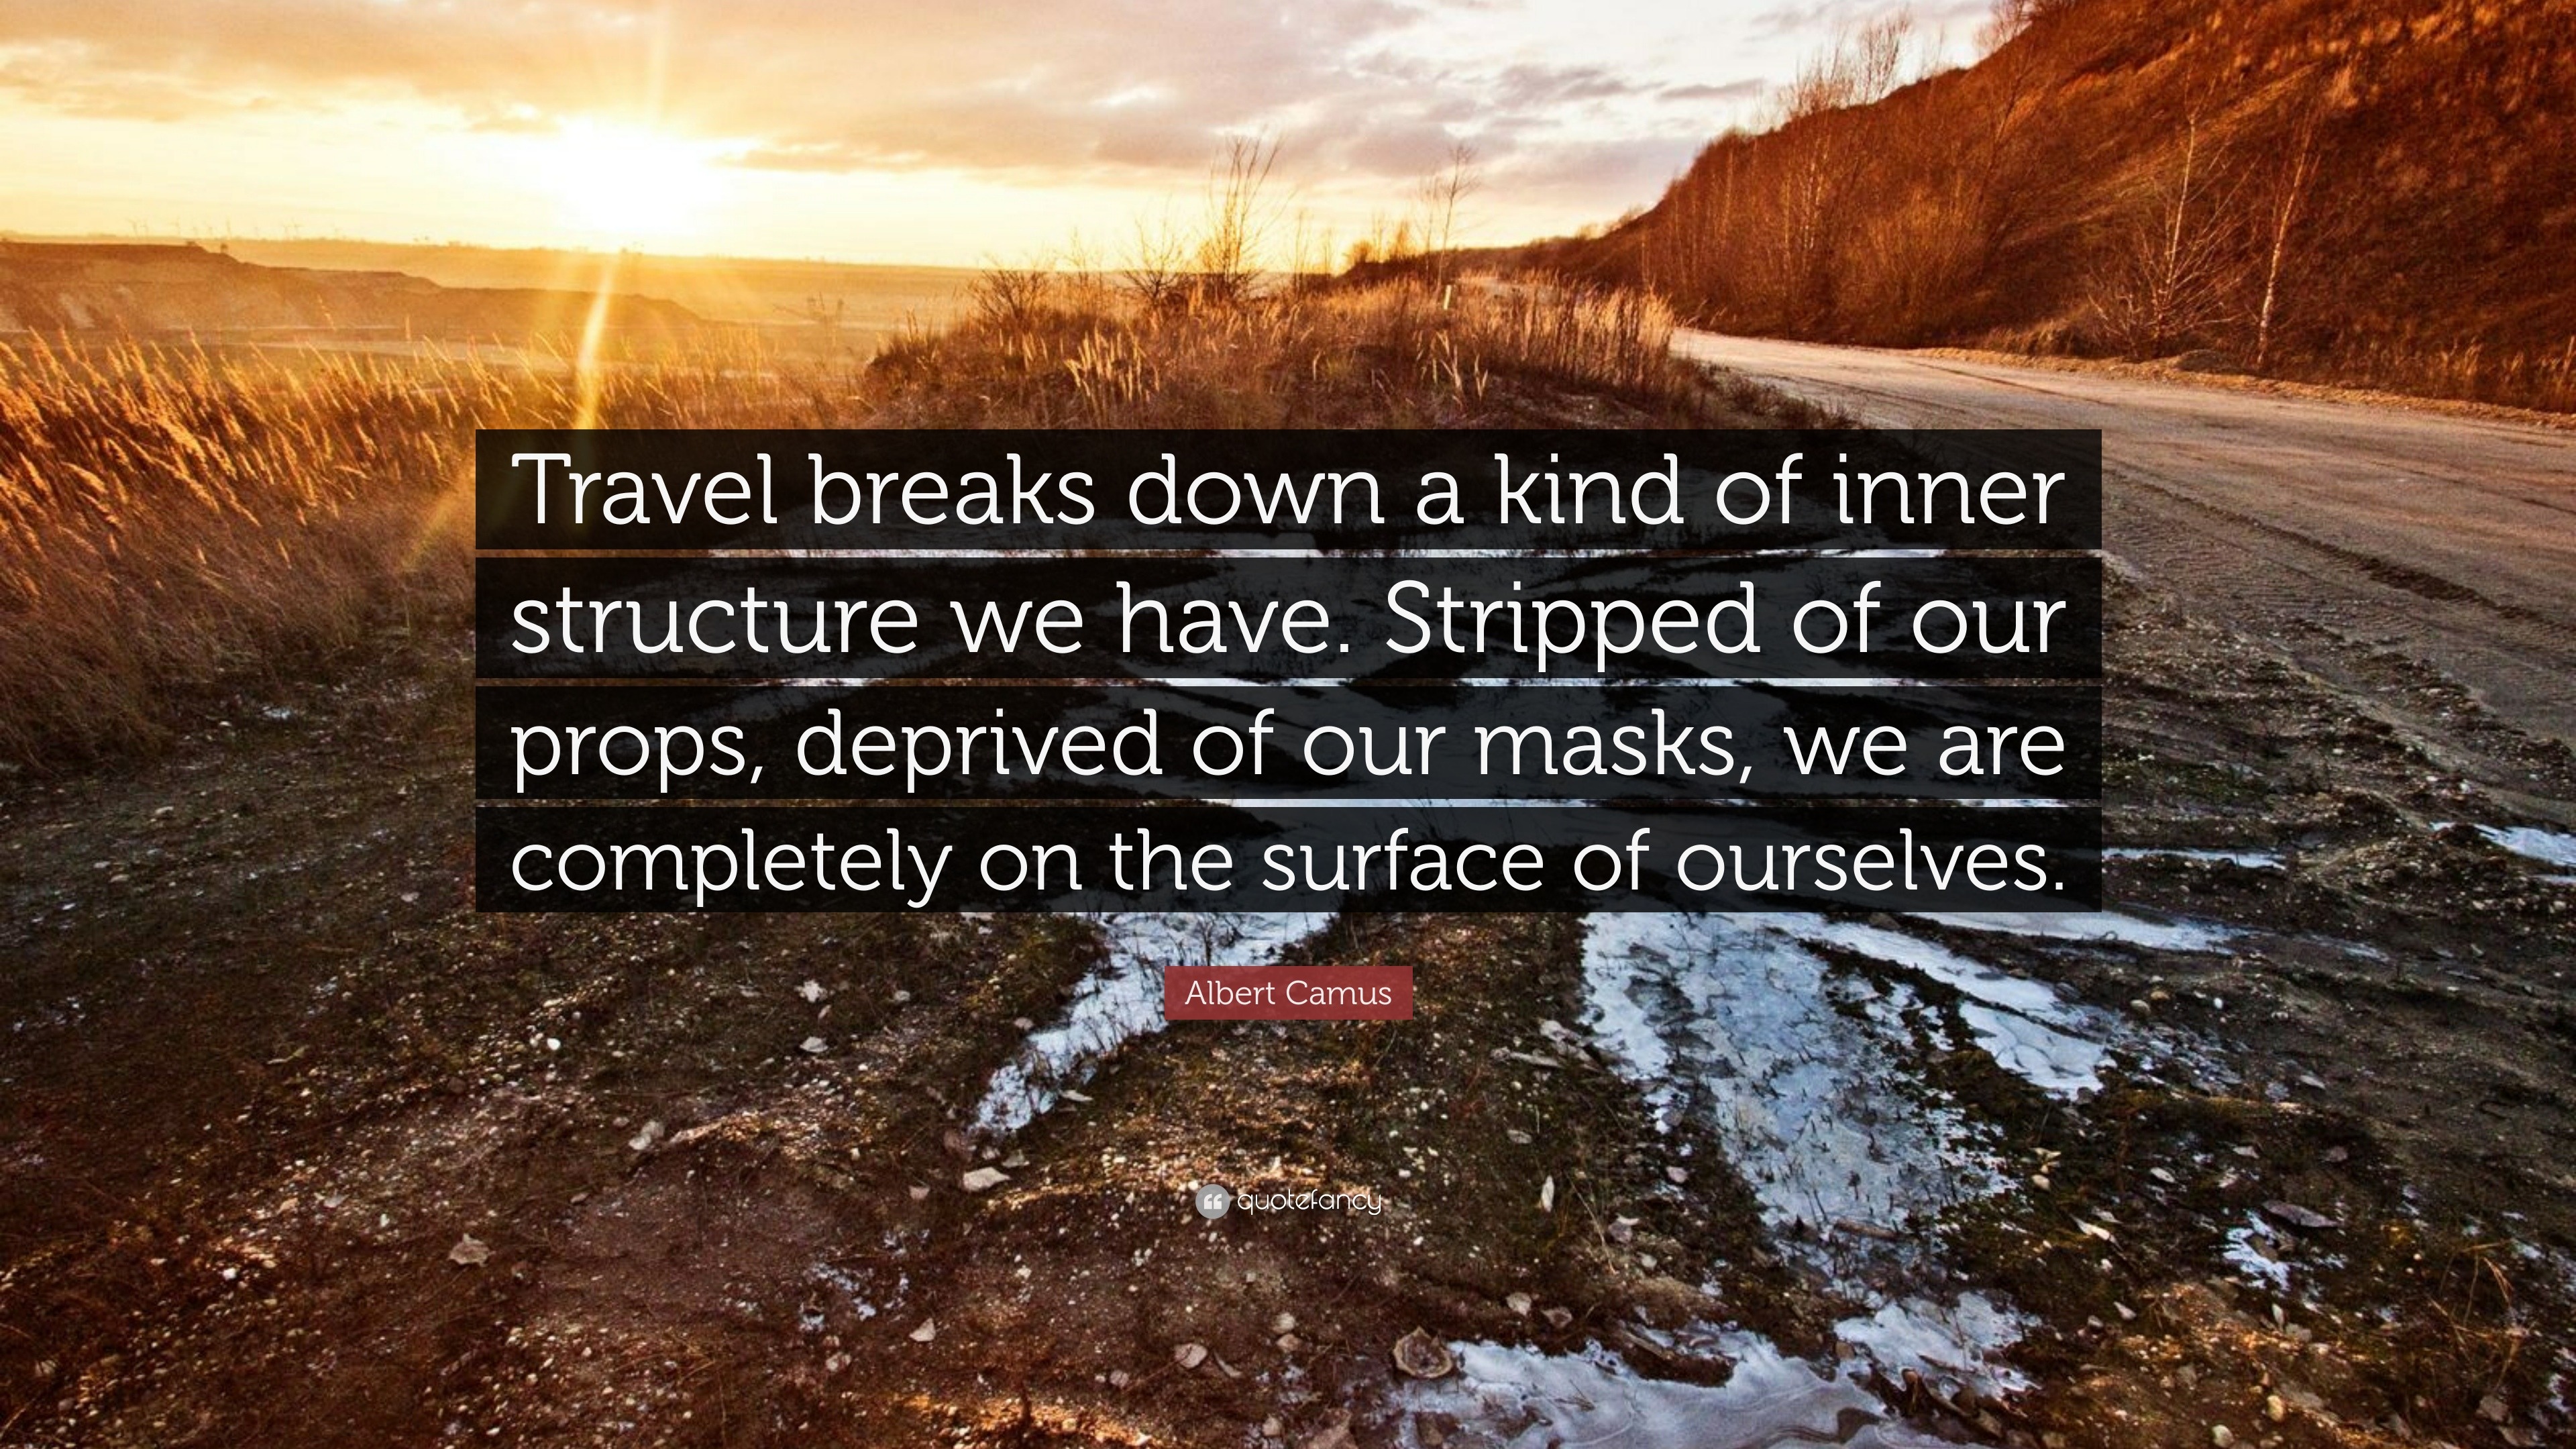 Albert Camus Quote: “Travel breaks down a kind of inner structure we have.  Stripped of our props, deprived of our masks, we are completely on...”